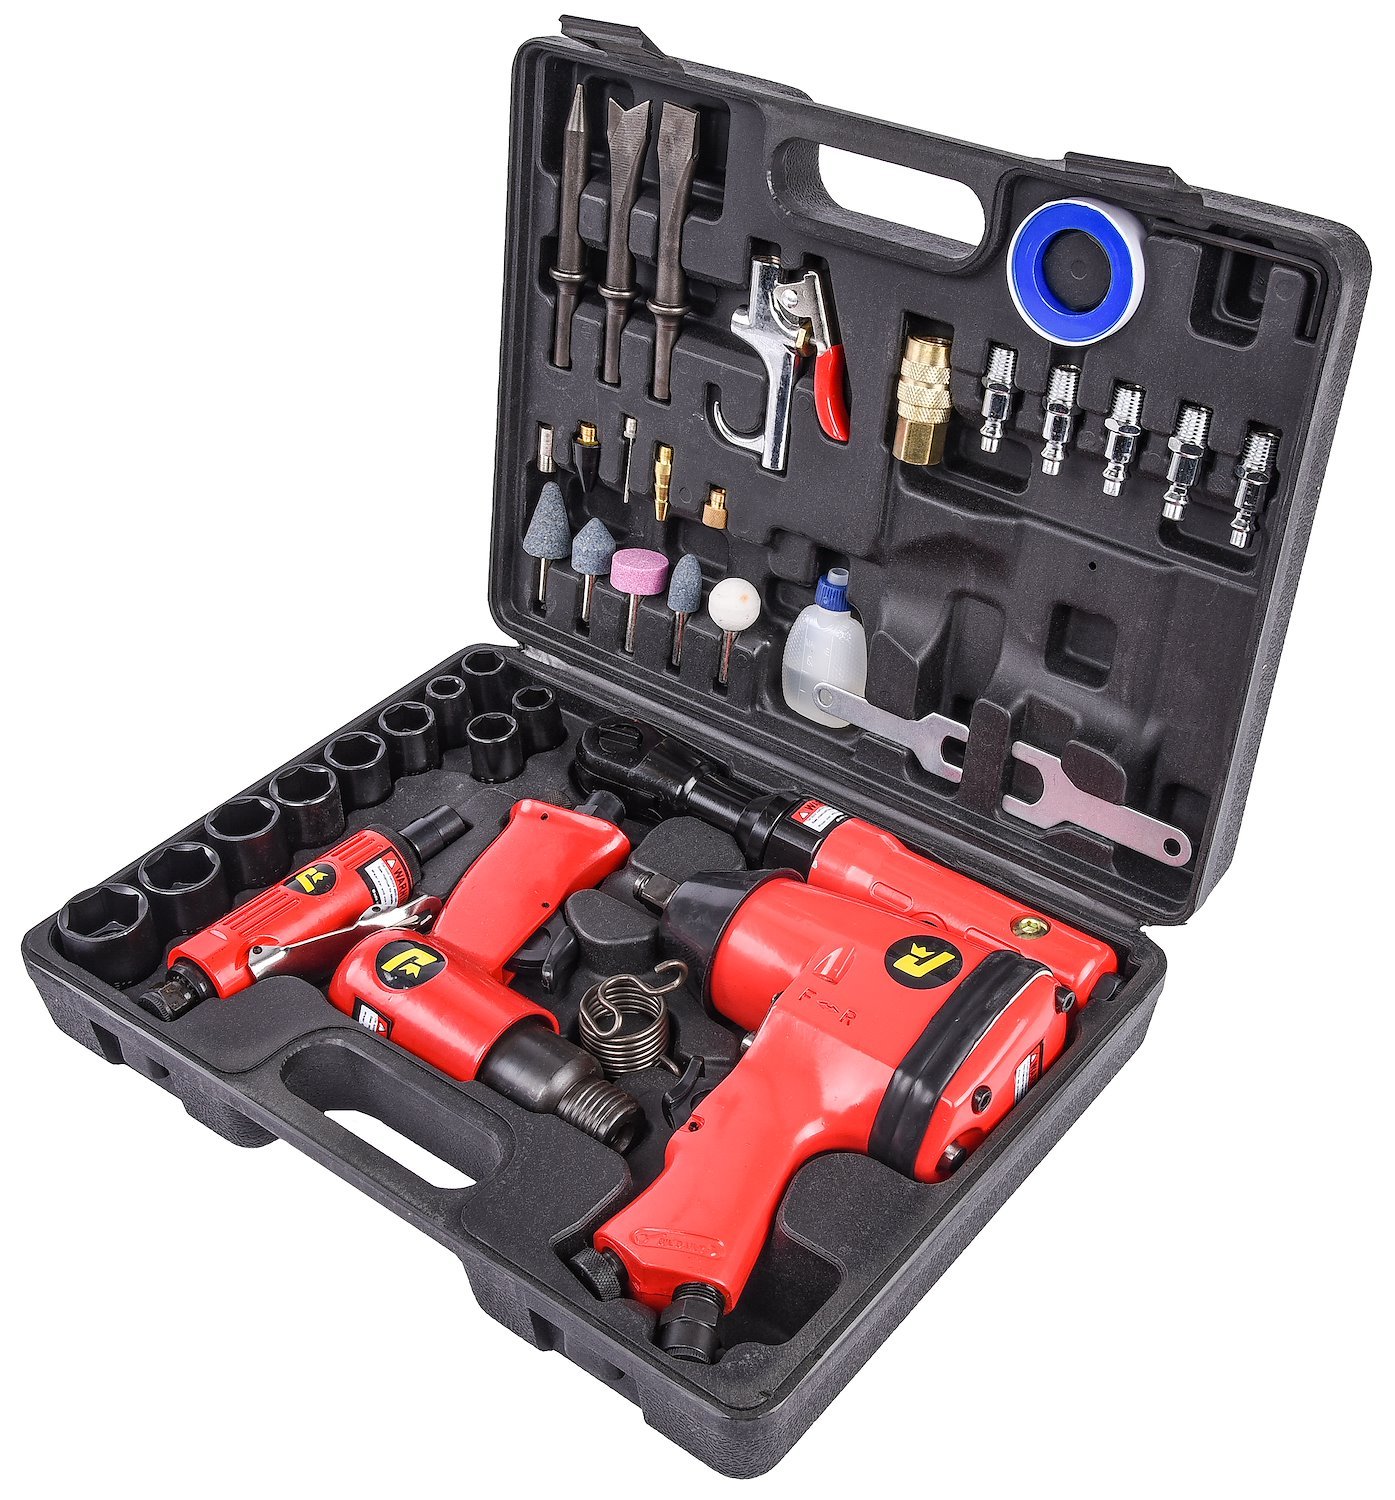 JEGS 81151: Air Tool Kit | 41-Piece | Impact & Ratchet Wrench, Air Hammer,  Die Grinder & Accessories | Includes Molded Storage Carrying Case - JEGS